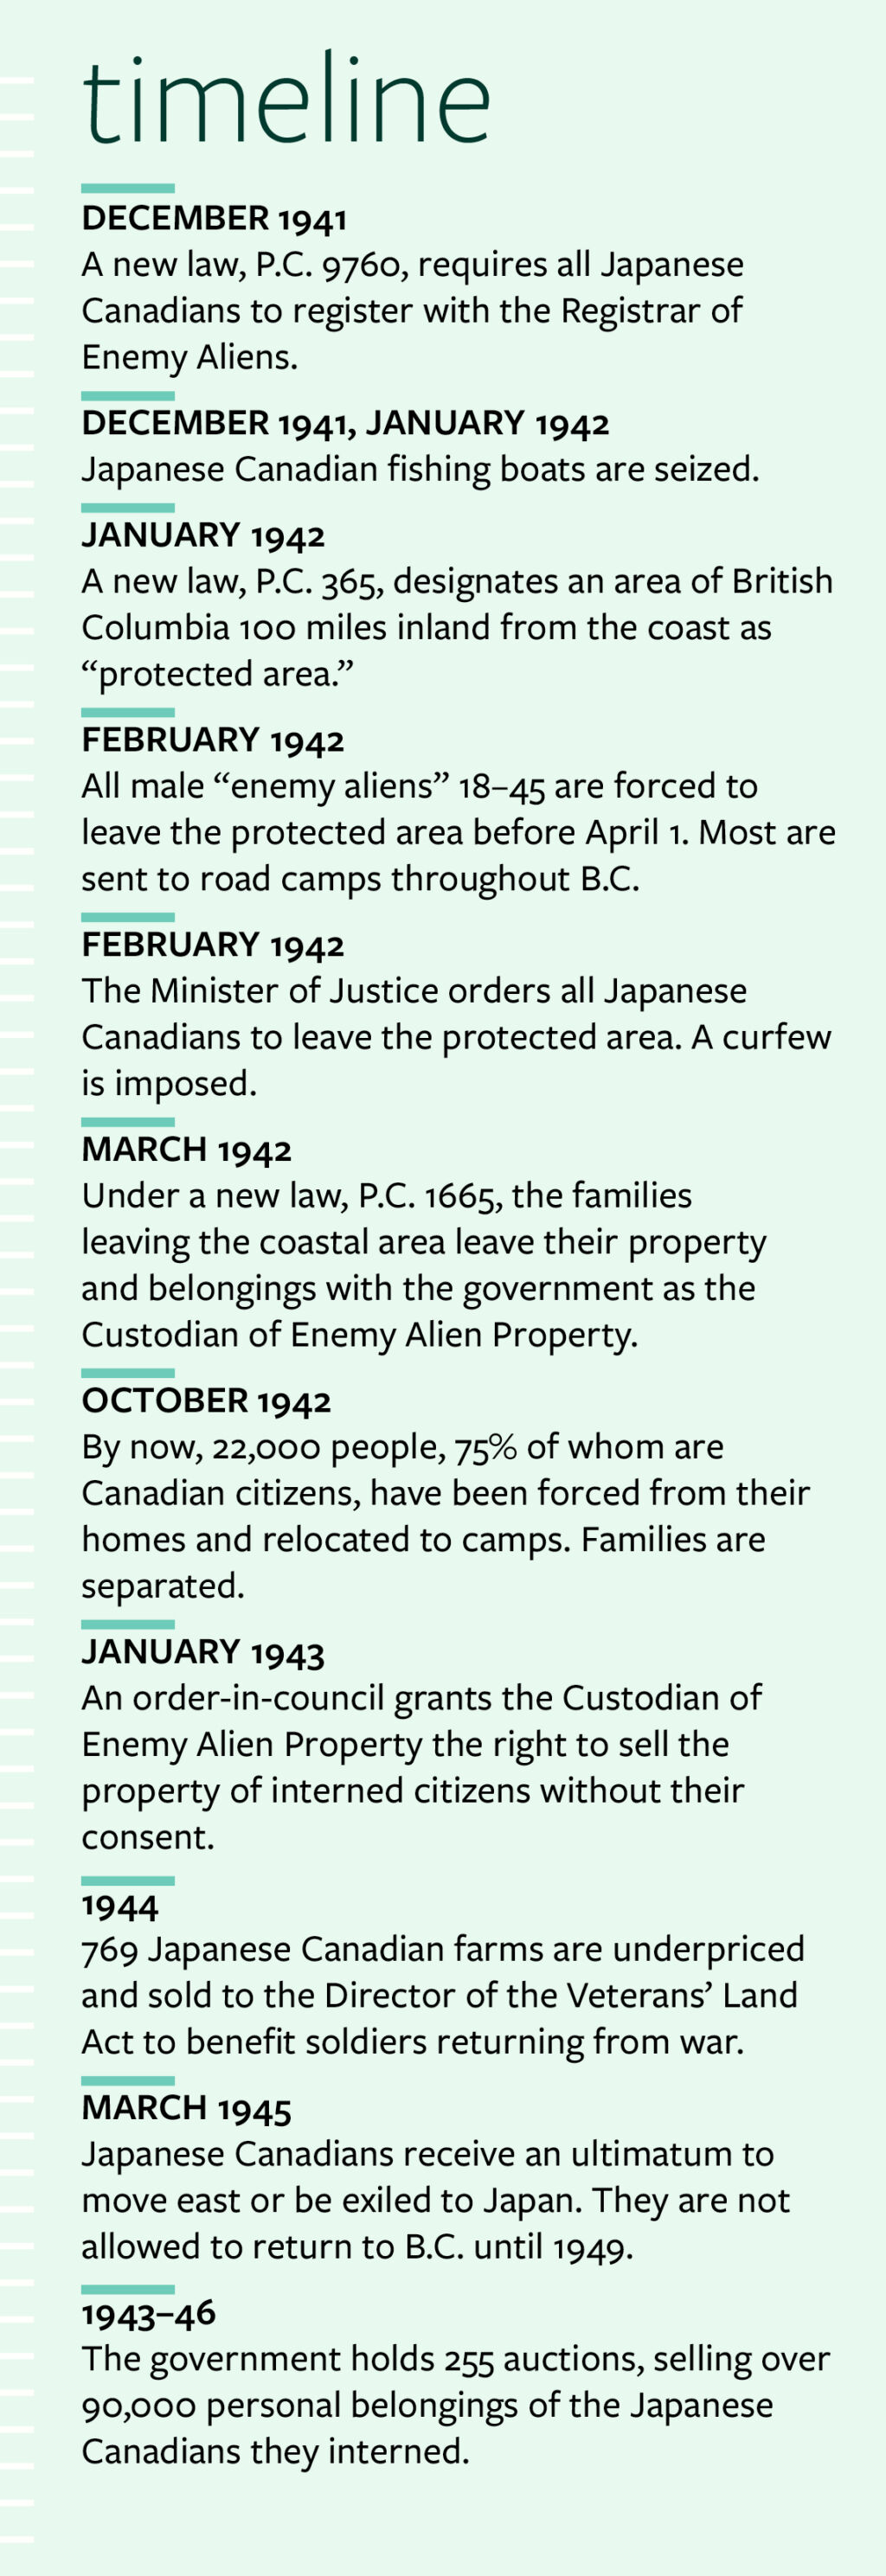 Timeline: DECEMBER 1941  A new law, P.C. 9760, requires all Japanese Canadians to register with the Registrar of Enemy Aliens. DECEMBER 1941, JANUARY 1942  Japanese Canadian fishing boats are seized. JANUARY 1942  A new law, P.C. 365, designates an area of British Columbia 100 miles inland from the coast as “protected area.” FEBRUARY 1942  All male “enemy aliens” 18–45 are forced to leave the protected area before April 1. Most are sent to road camps throughout B.C. FEBRUARY 1942  The Minister of Justice orders all Japanese Canadians to leave the protected area. A curfew is imposed. MARCH 1942  Under a new law, P.C. 1665, the families leaving the coastal area leave their property and belongings with the government as the Custodian of Enemy Alien Property. OCTOBER 1942  By now, 22,000 people, 75% of whom are Canadian citizens, have been forced from their homes and relocated to camps. Families are separated. JANUARY 1943  An order-in-council grants the Custodian of Enemy Alien Property the right to sell the property of interned citizens without their consent.  1944  769 Japanese Canadian farms are underpriced and sold to the Director of the Veterans’ Land Act to benefit soldiers returning from war. MARCH 1945  Japanese Canadians receive an ultimatum to move east or be exiled to Japan. They are not allowed to return to B.C. until 1949. 1943–46  The government holds 255 auctions, selling over 90,000 personal belongings of the Japanese Canadians they interned.